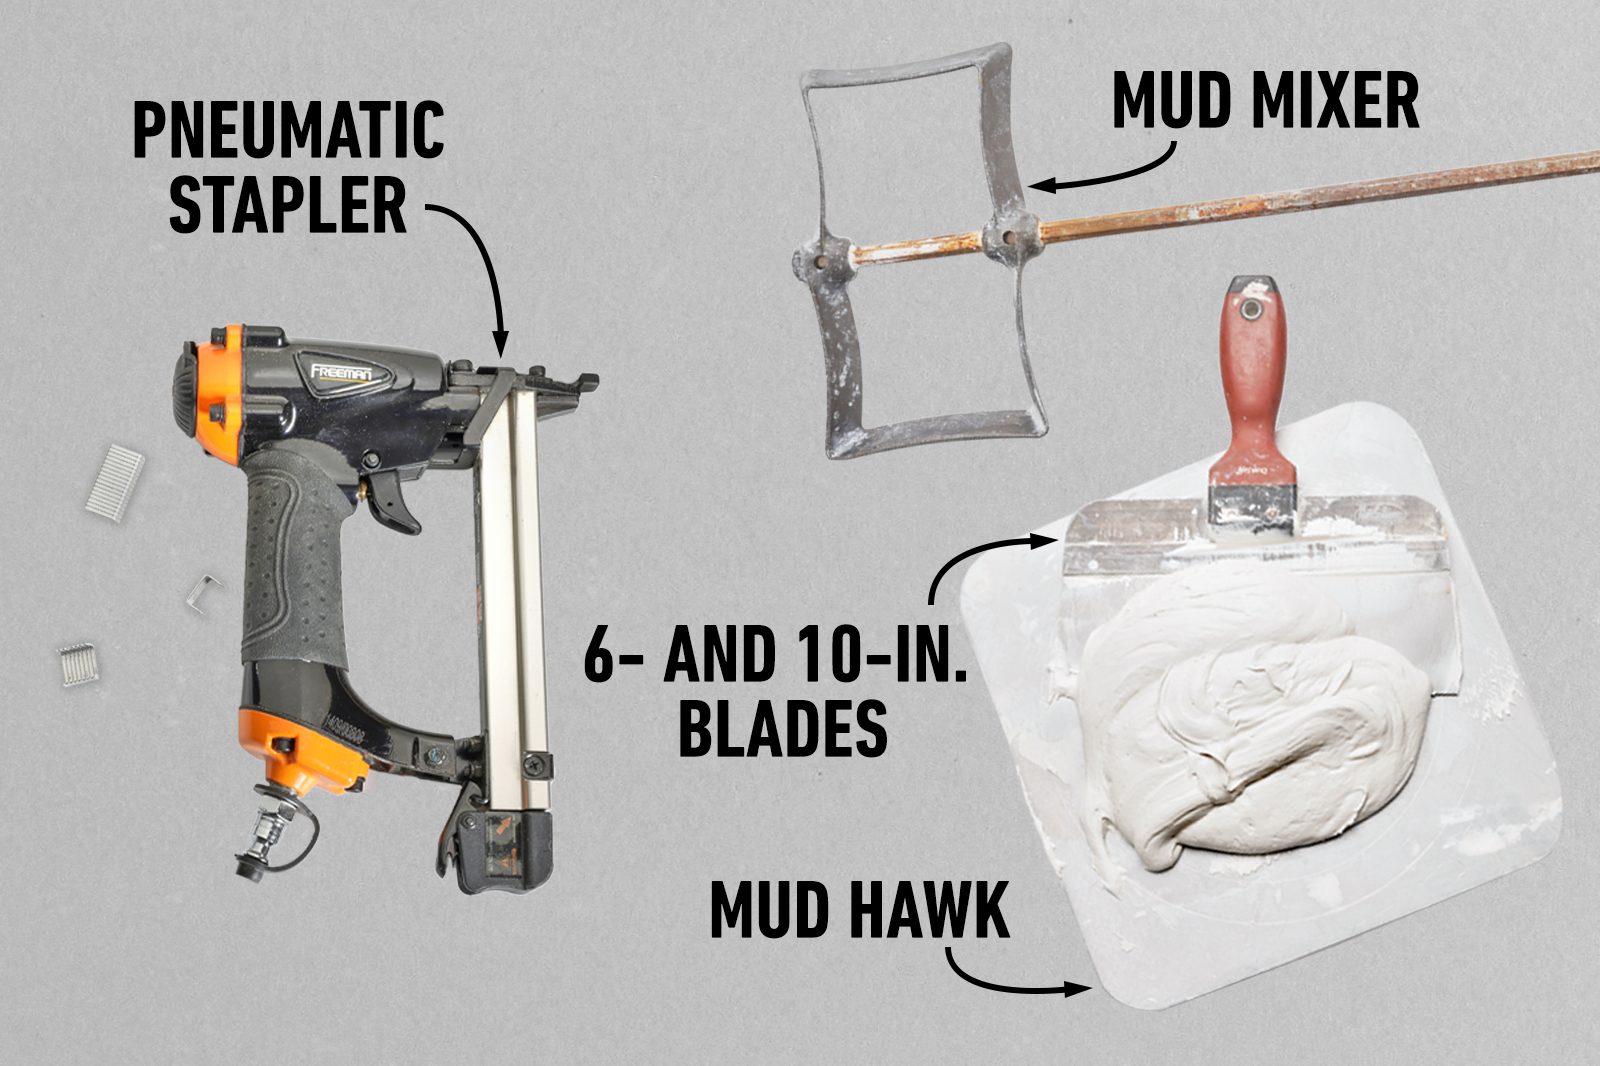 Fh22jun 618 10 018 019 020 Tools Include Mud Mixer Blades Pneumatic Stapler And Mud Hawk Homeowner's Guide To Drywall